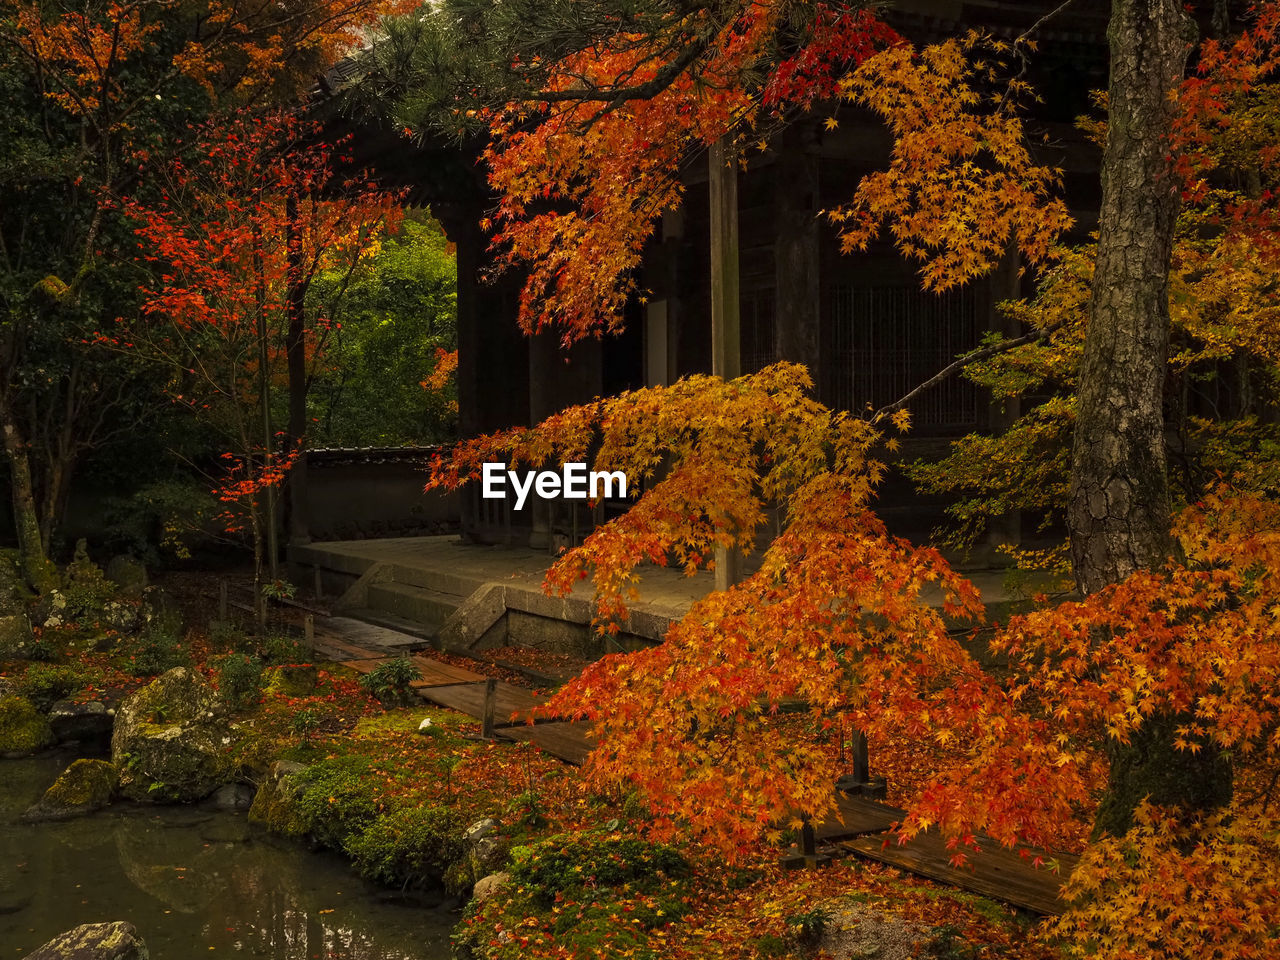 Autumn leaves of rengeji temple in kyoto